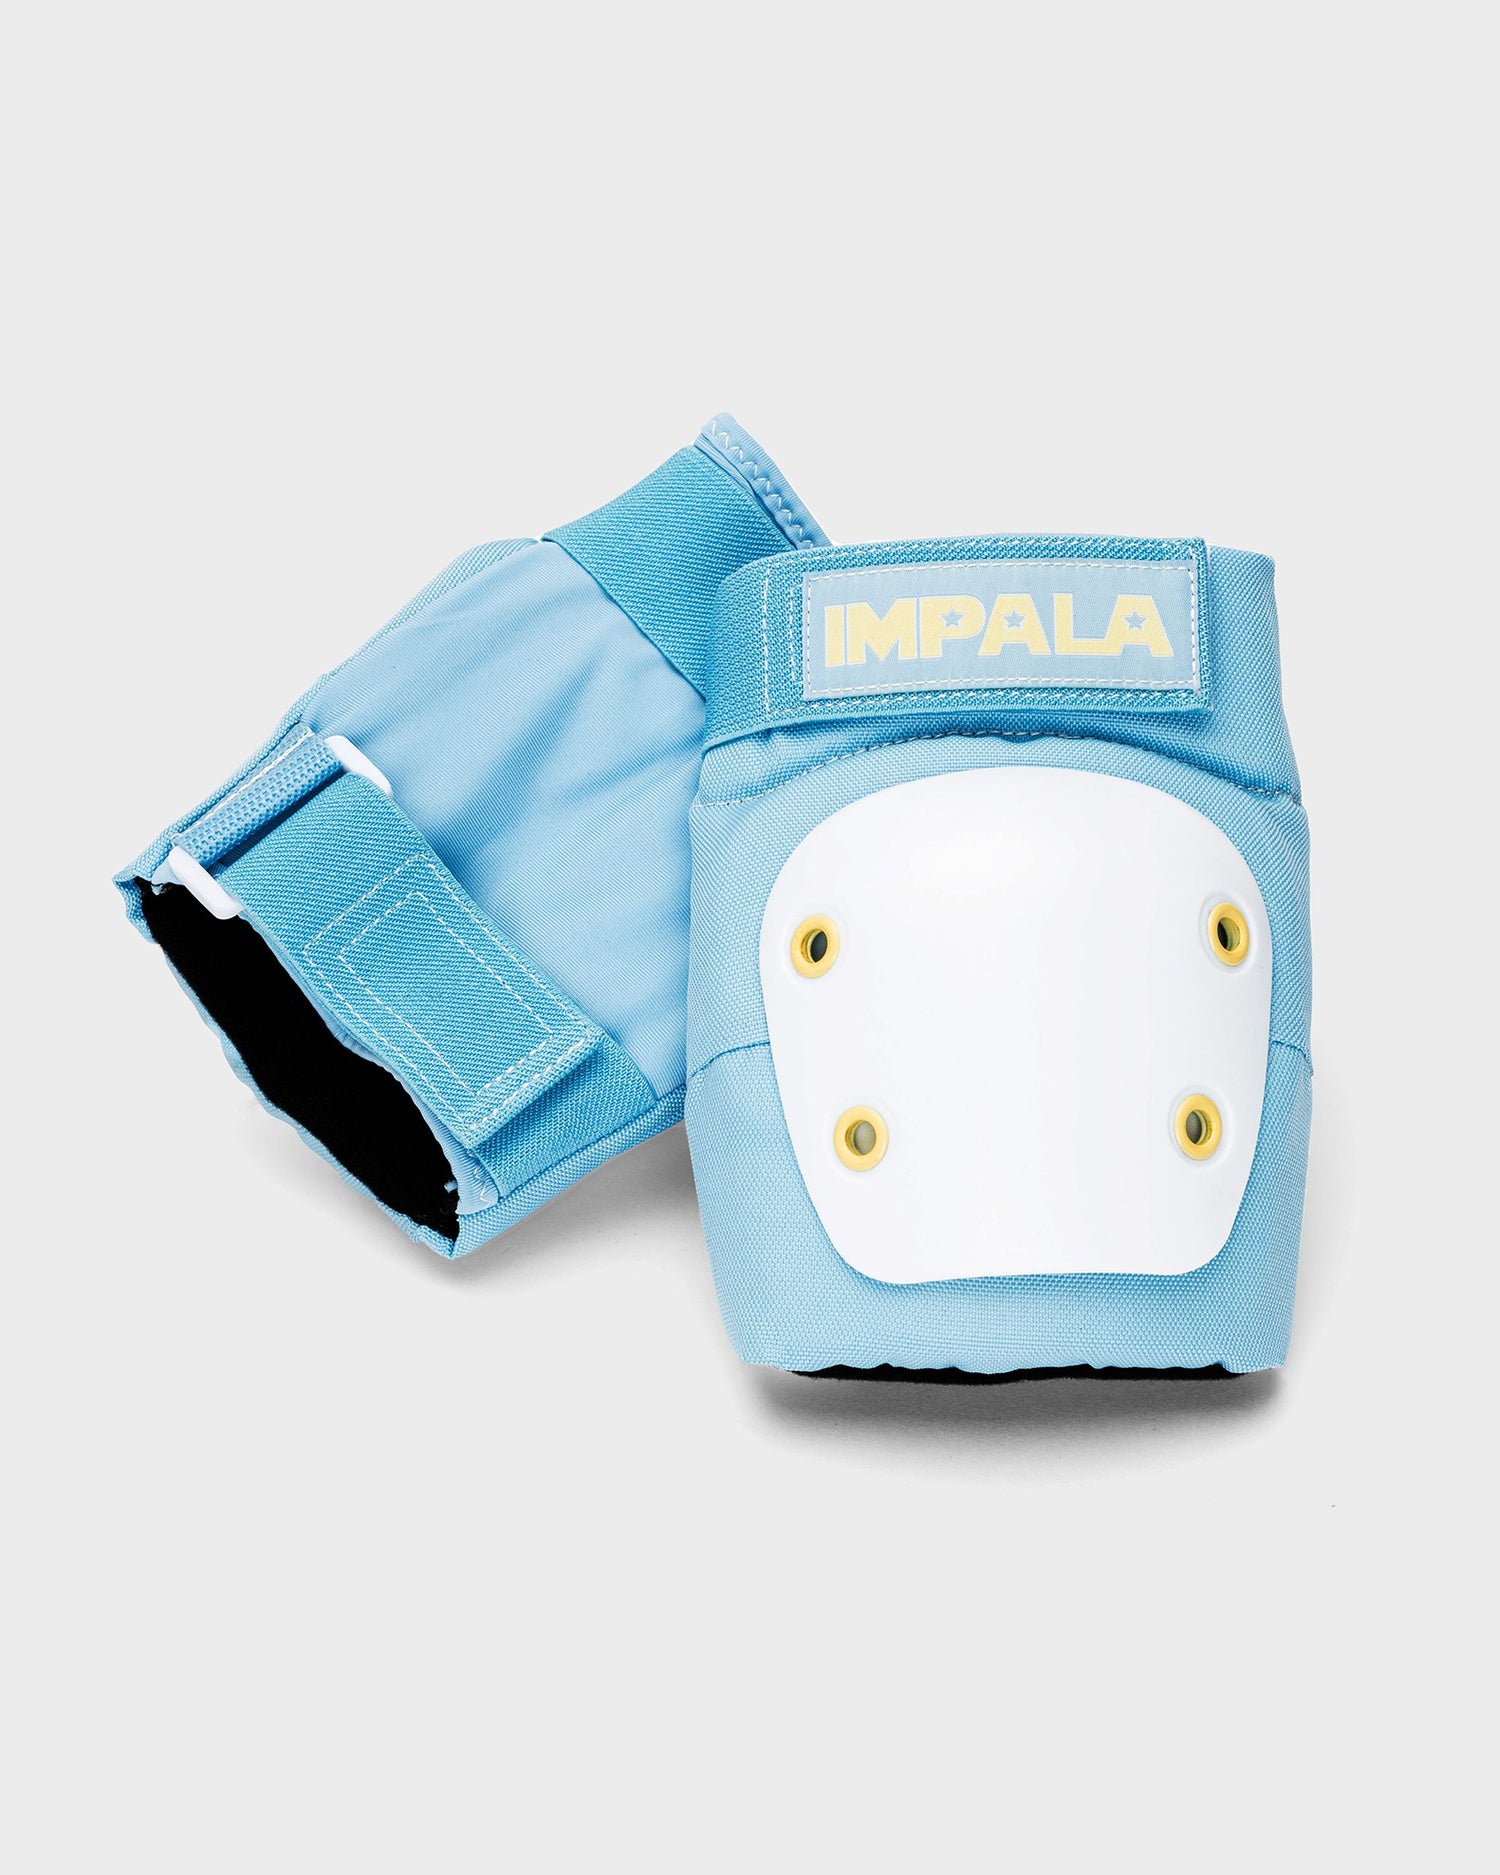 Knee pads in the Impala Protective Set Youth - Sky Blue/Yellow